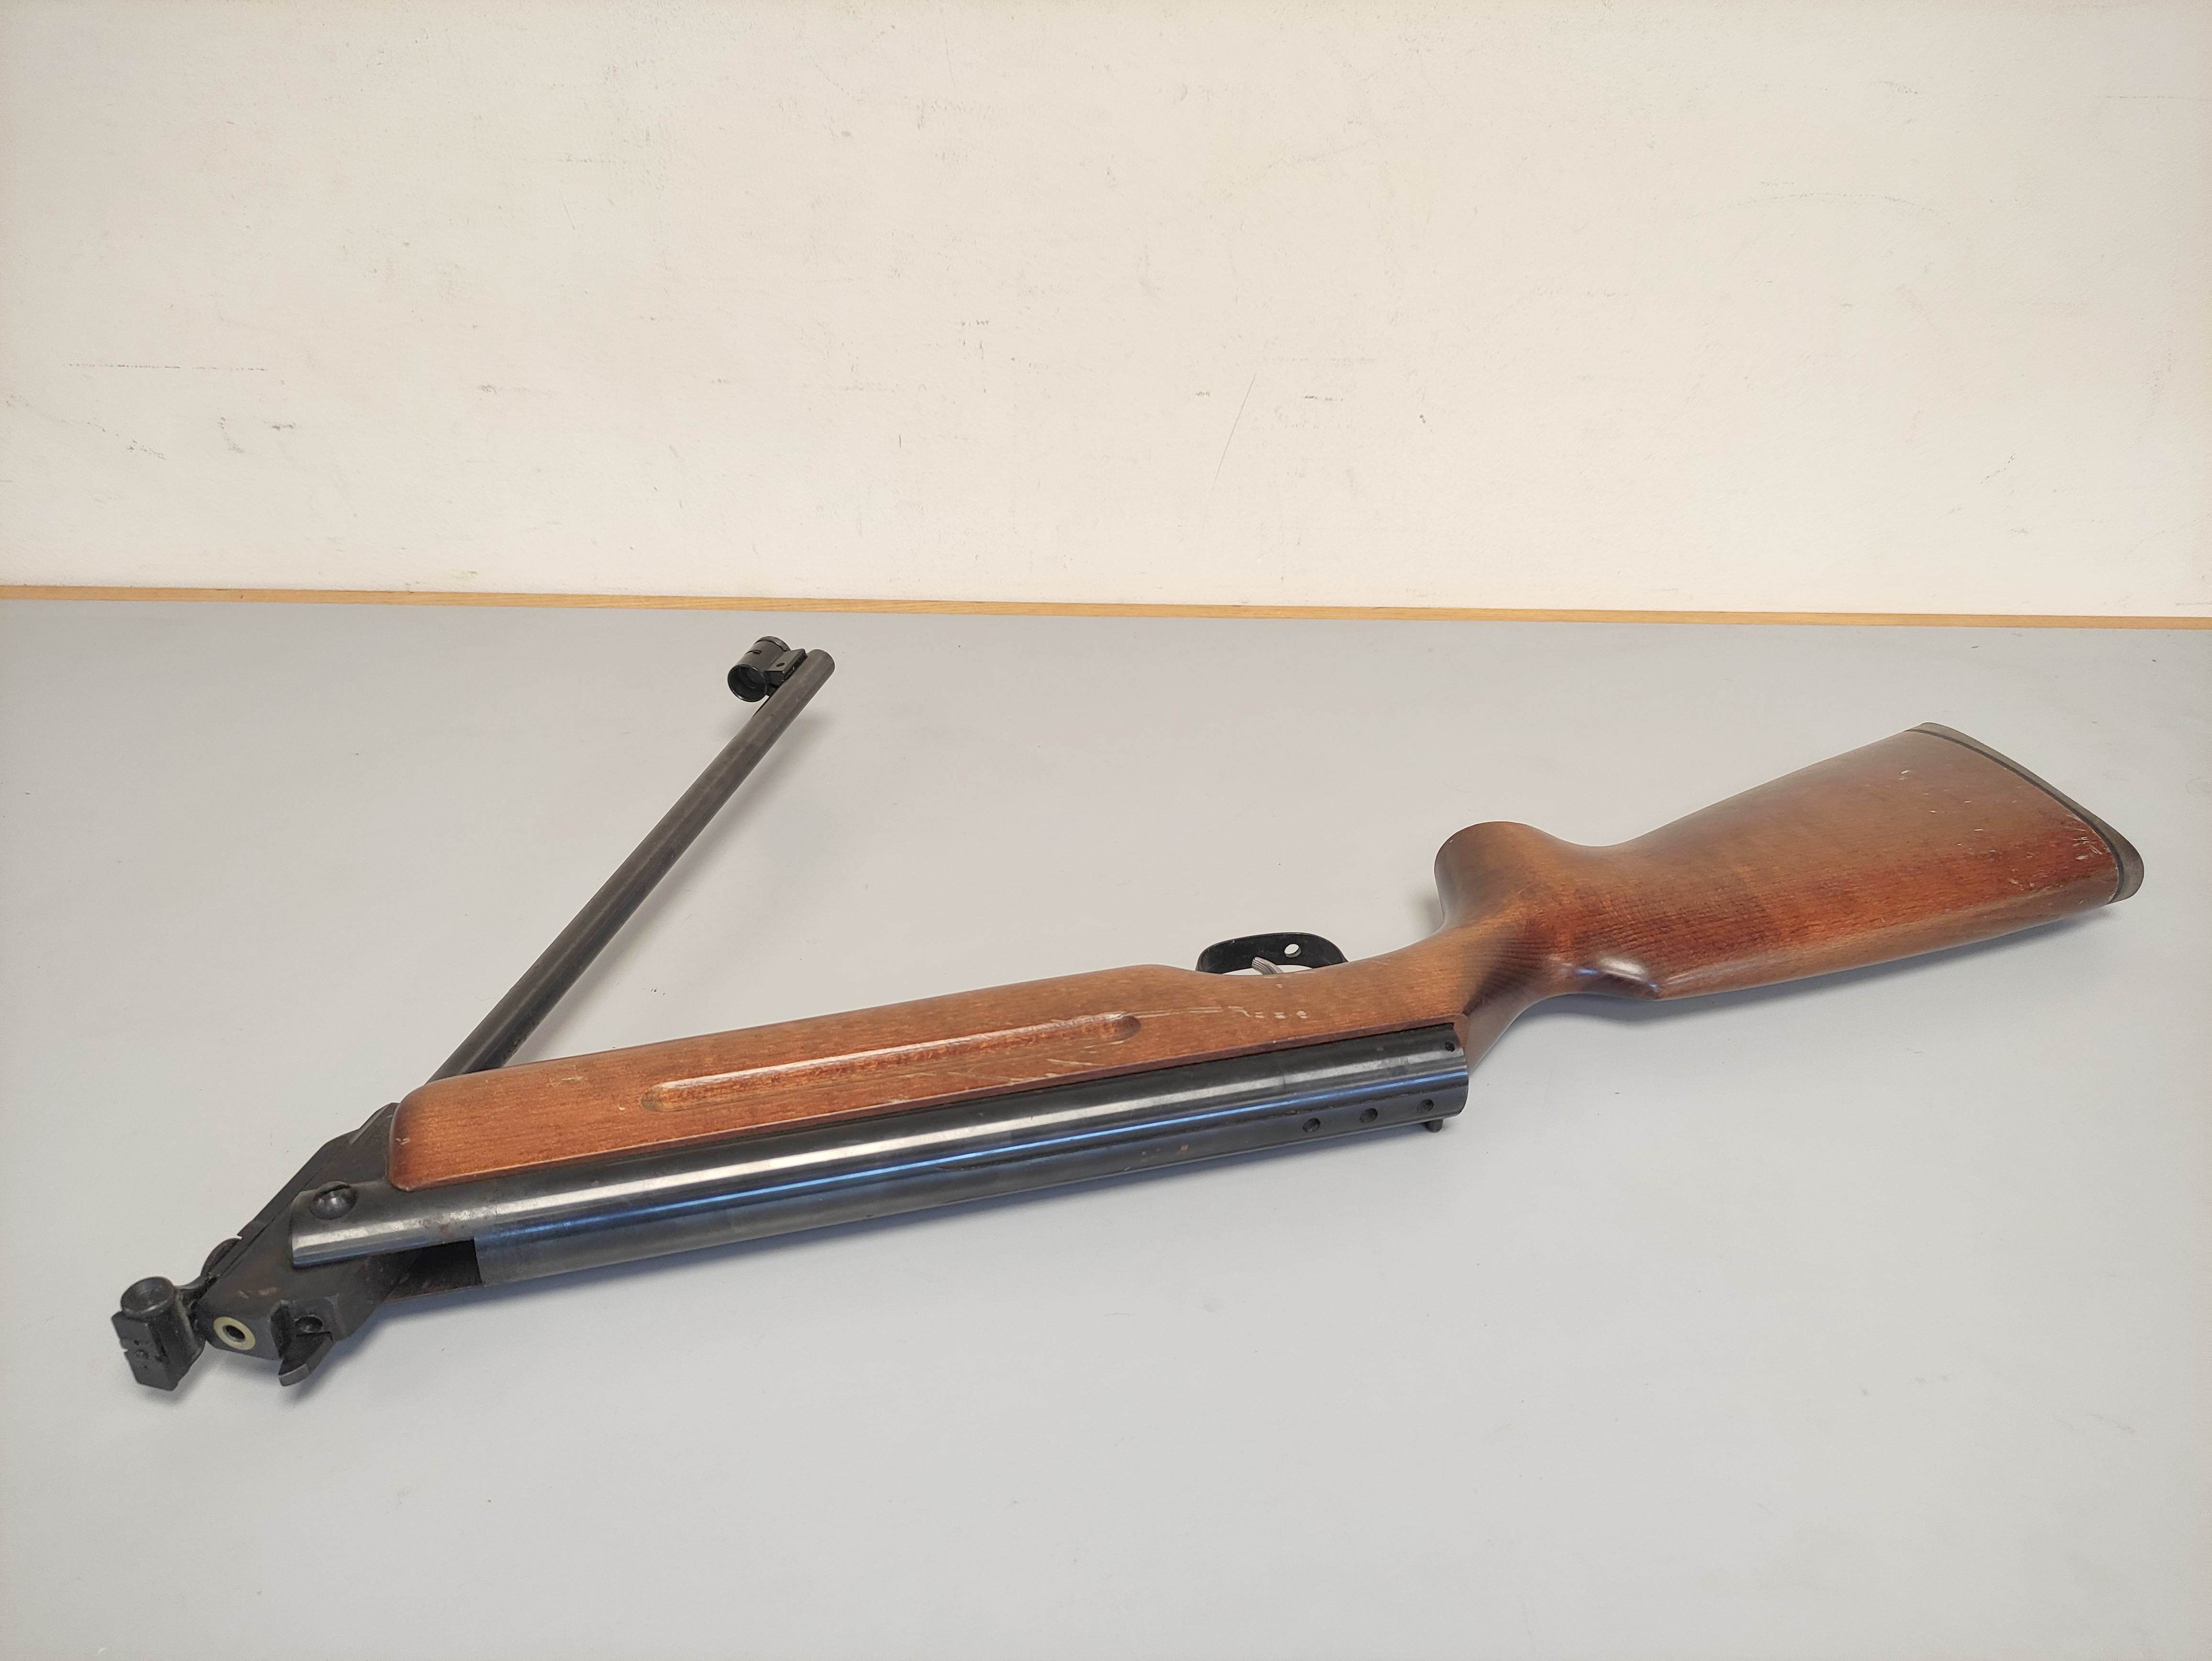 WEIHRAUCH HW35K Kal 5.5 .22 break barrel air rifle serial no 1431511 with ring sight. - Image 5 of 6